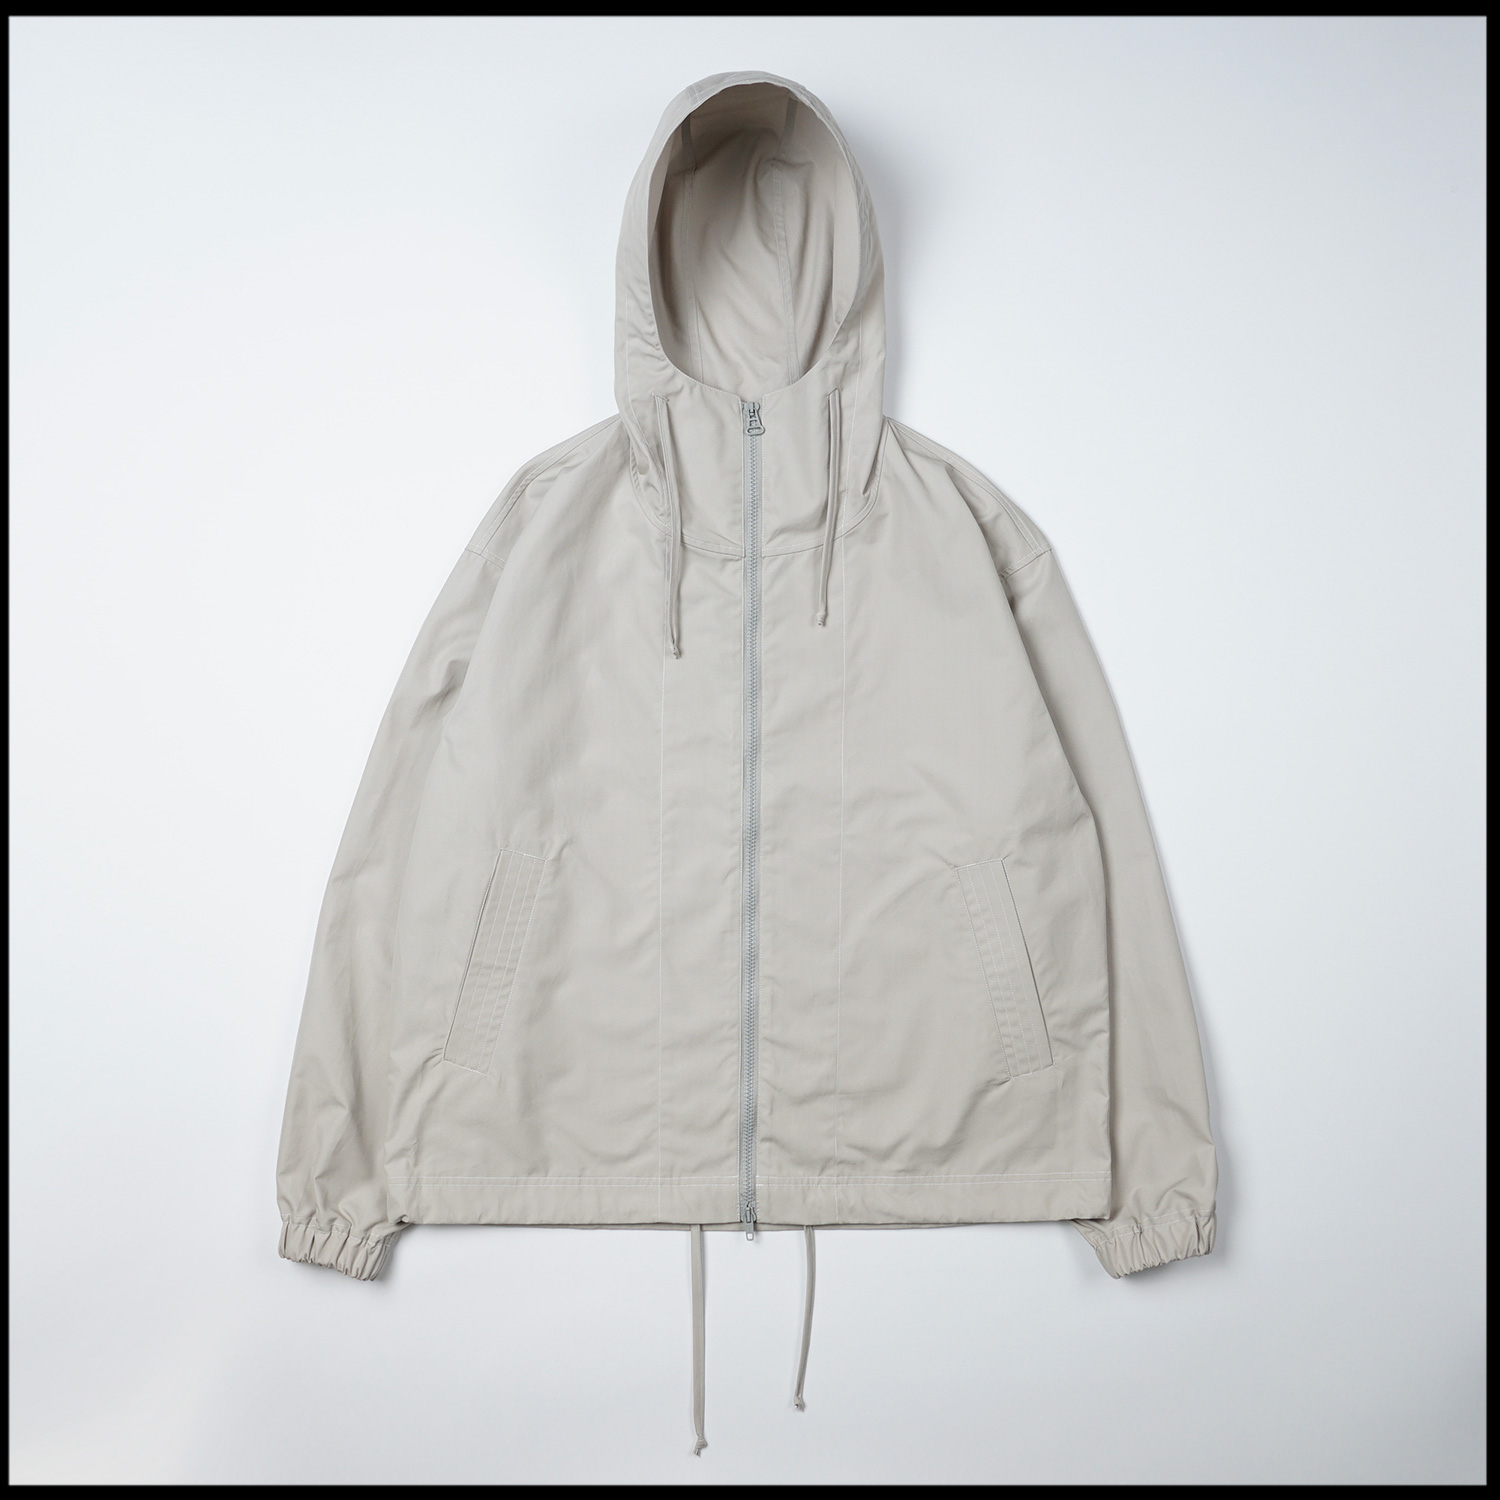 KAOLIN parka in Stone color by Arpenteur